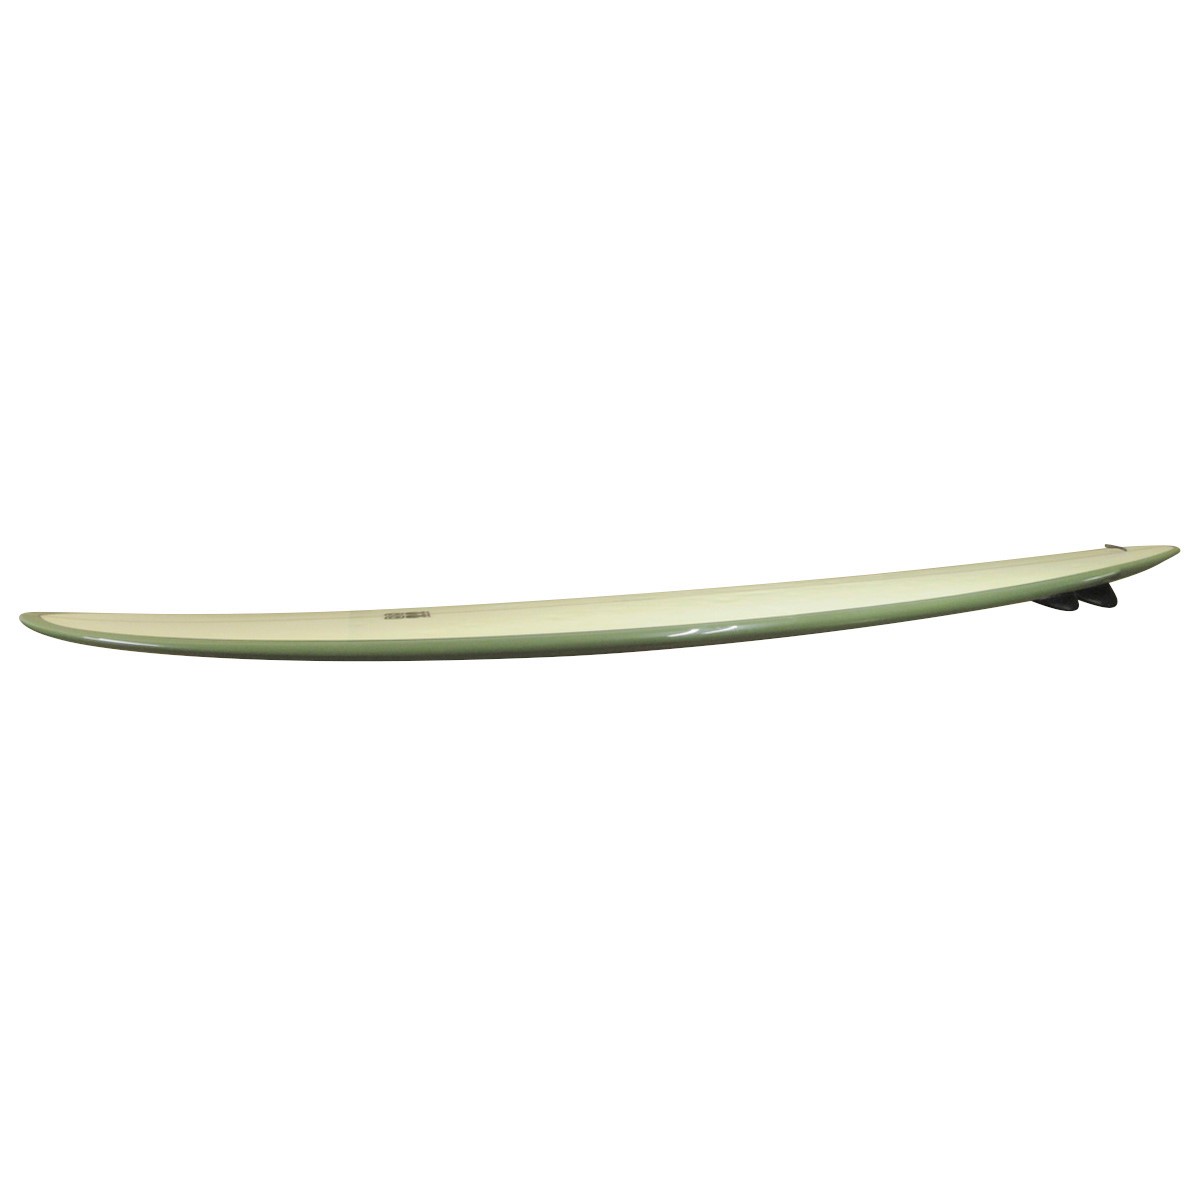 CAMPBELL BROTHERS / ELEVATED WING BONZER 5 9`1